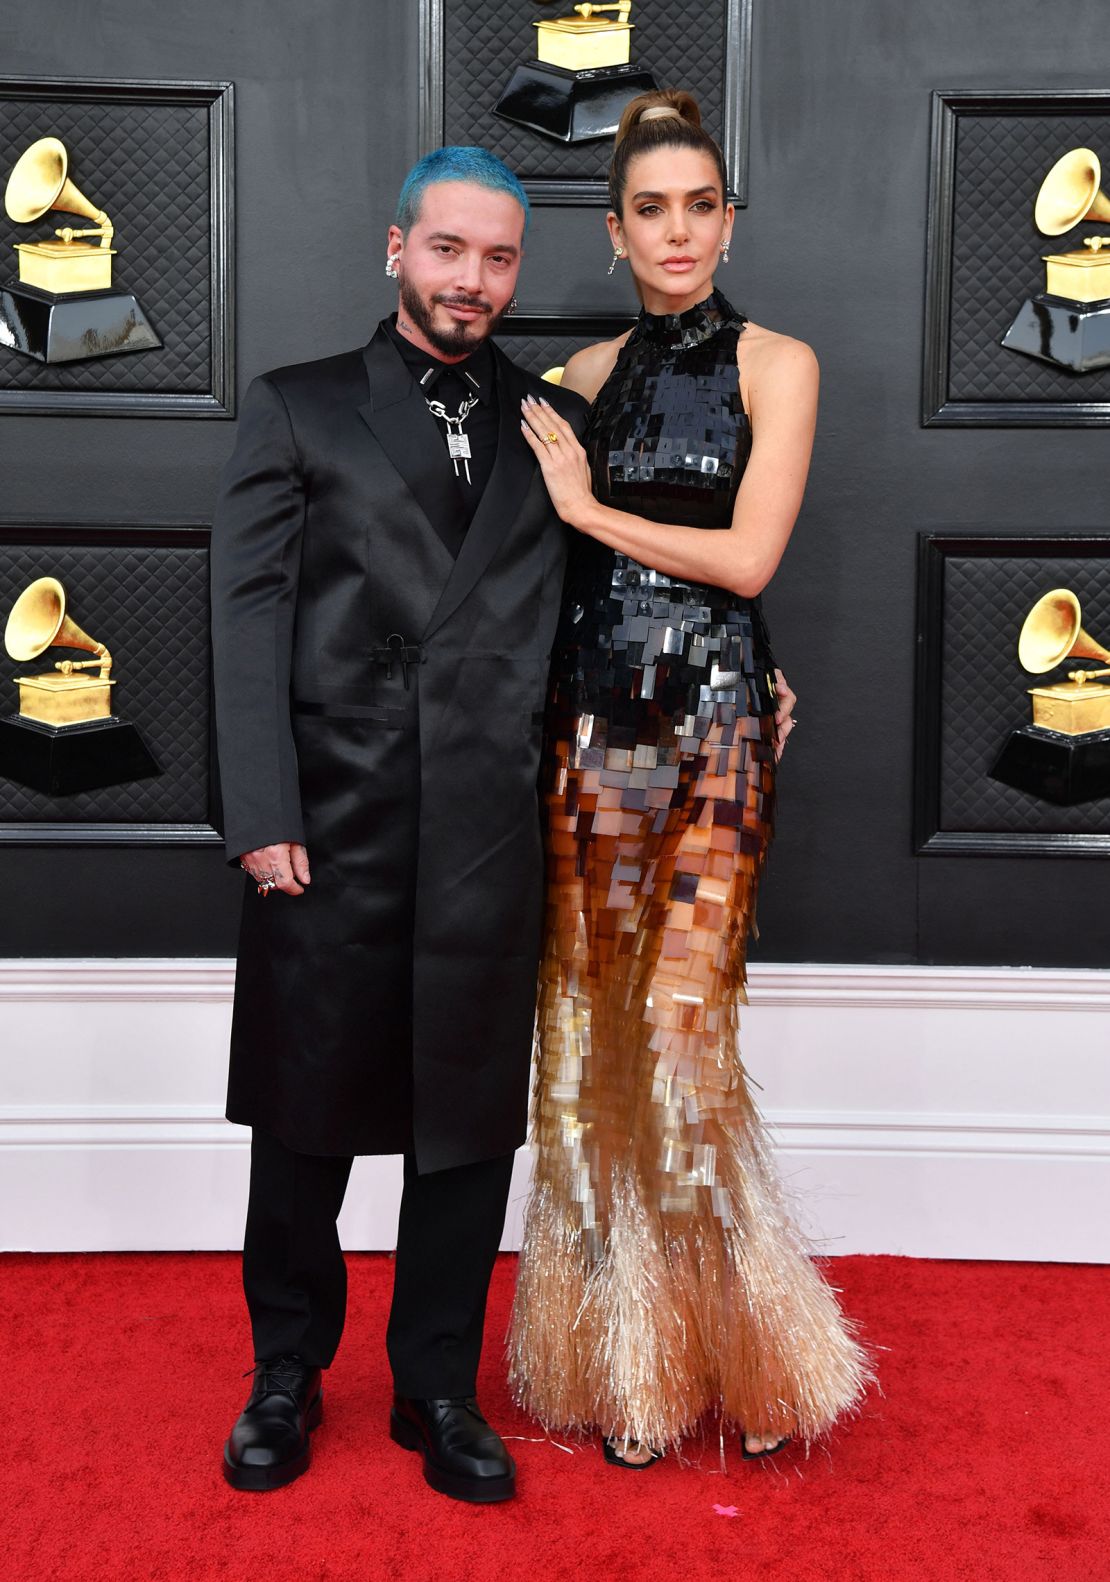 J Balvin elevated the suit silhouette in a tailored knee-length coat, while model Valentina Ferrer opted for a high-neck layered ombre dress with a gold fringed hem. 